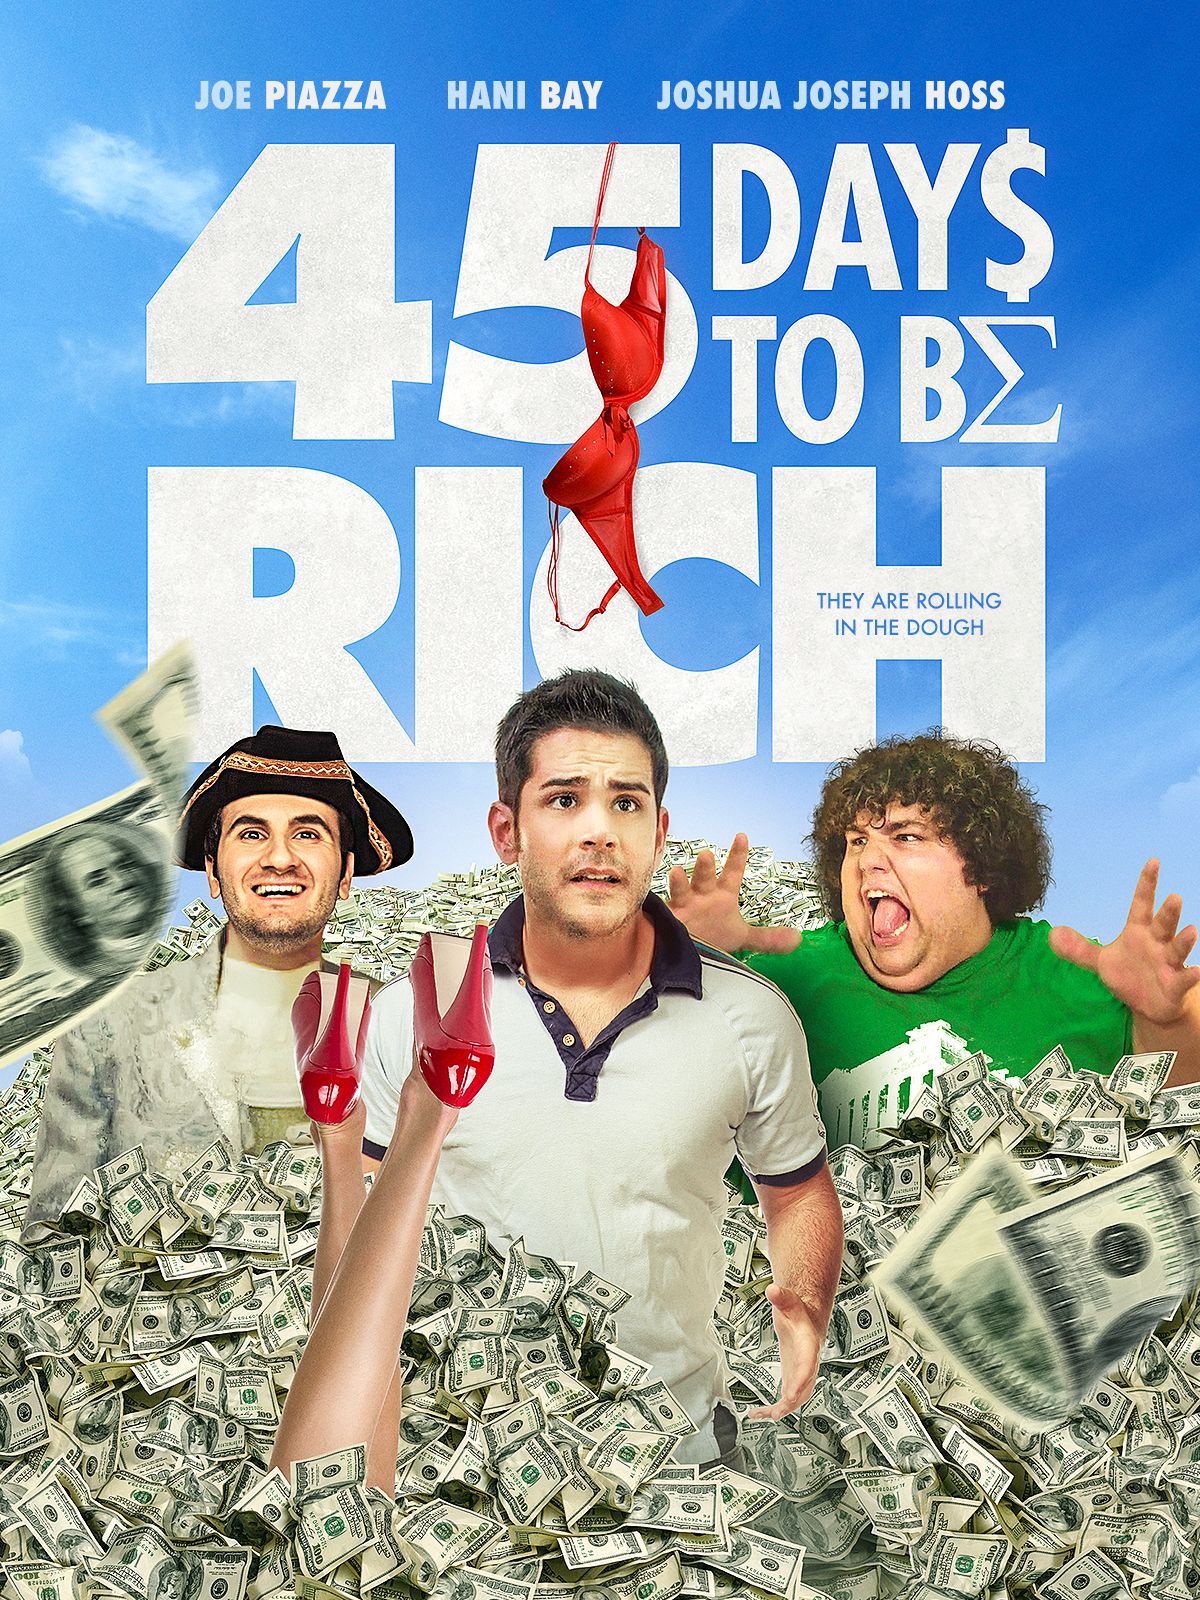 Keyart for the movie 45 Days to Be Rich